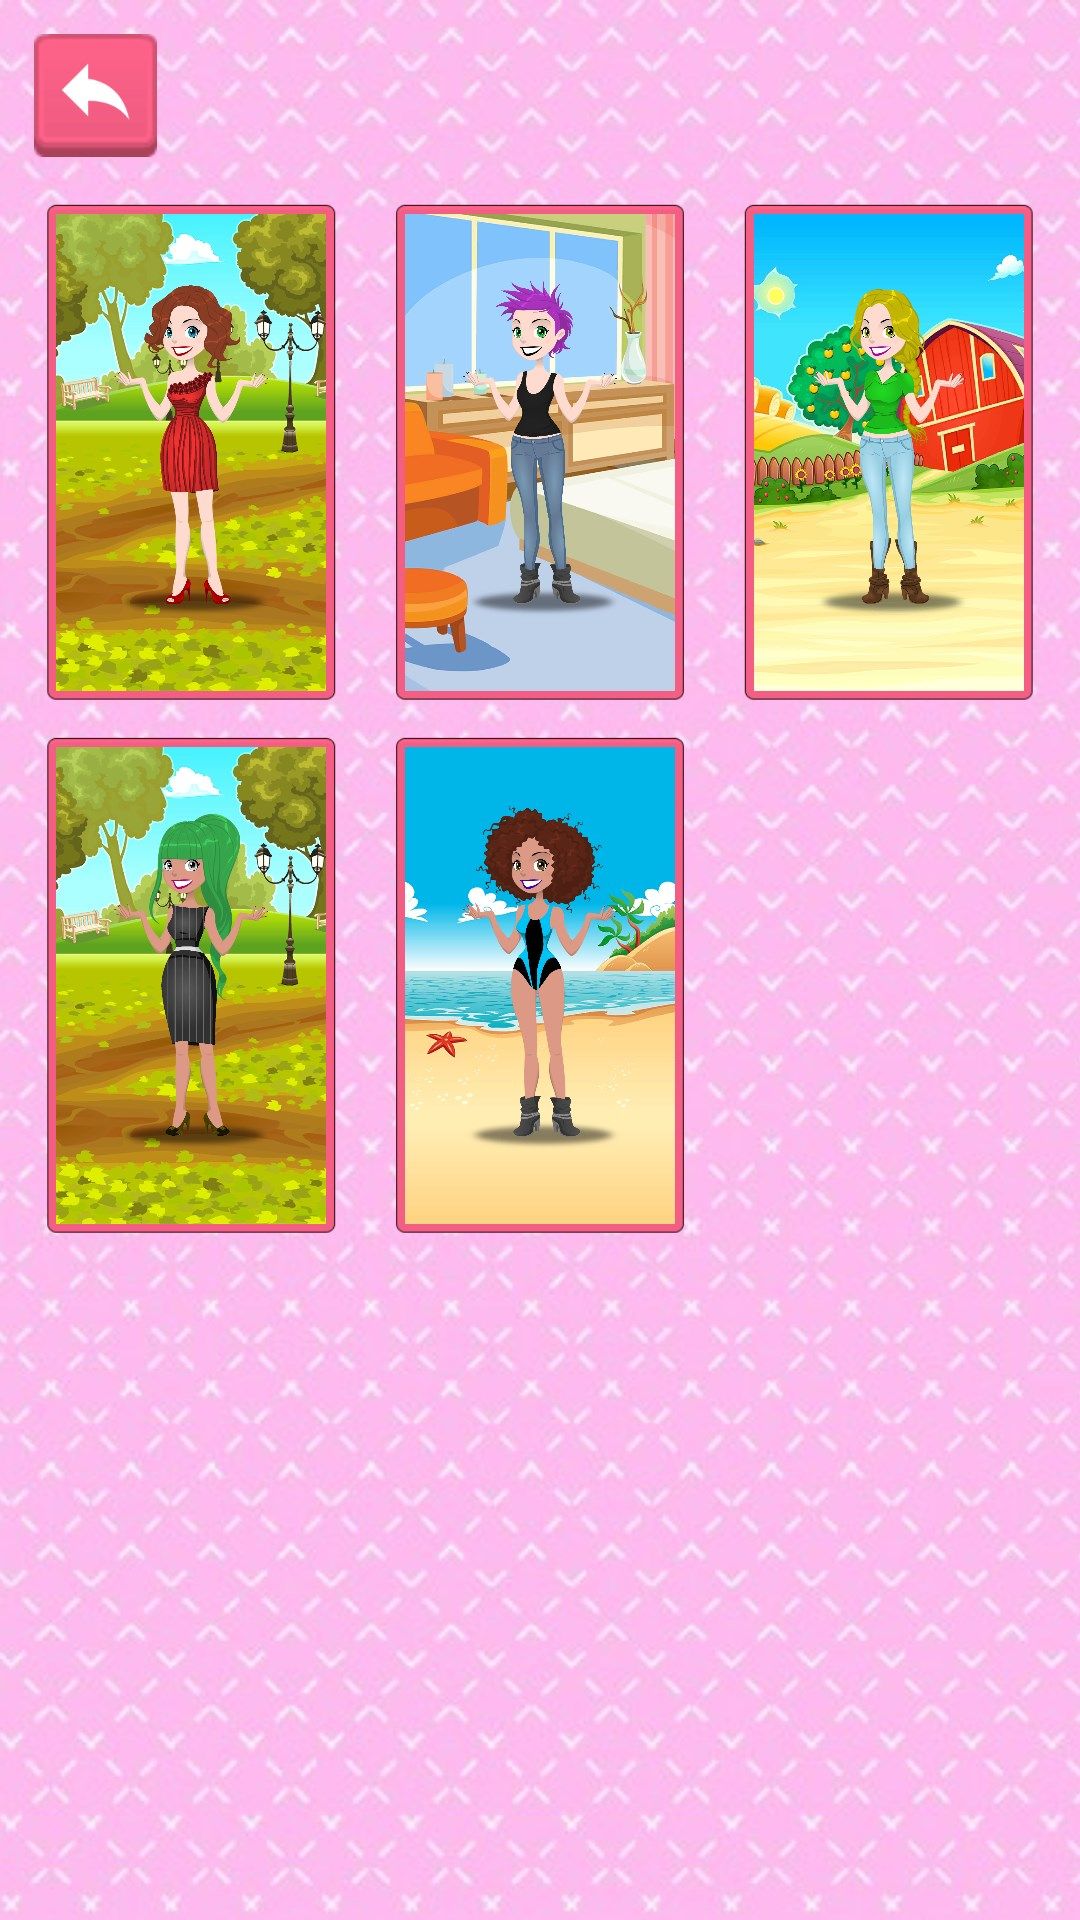 Girl Life Dress Up - Dressing with Creativity